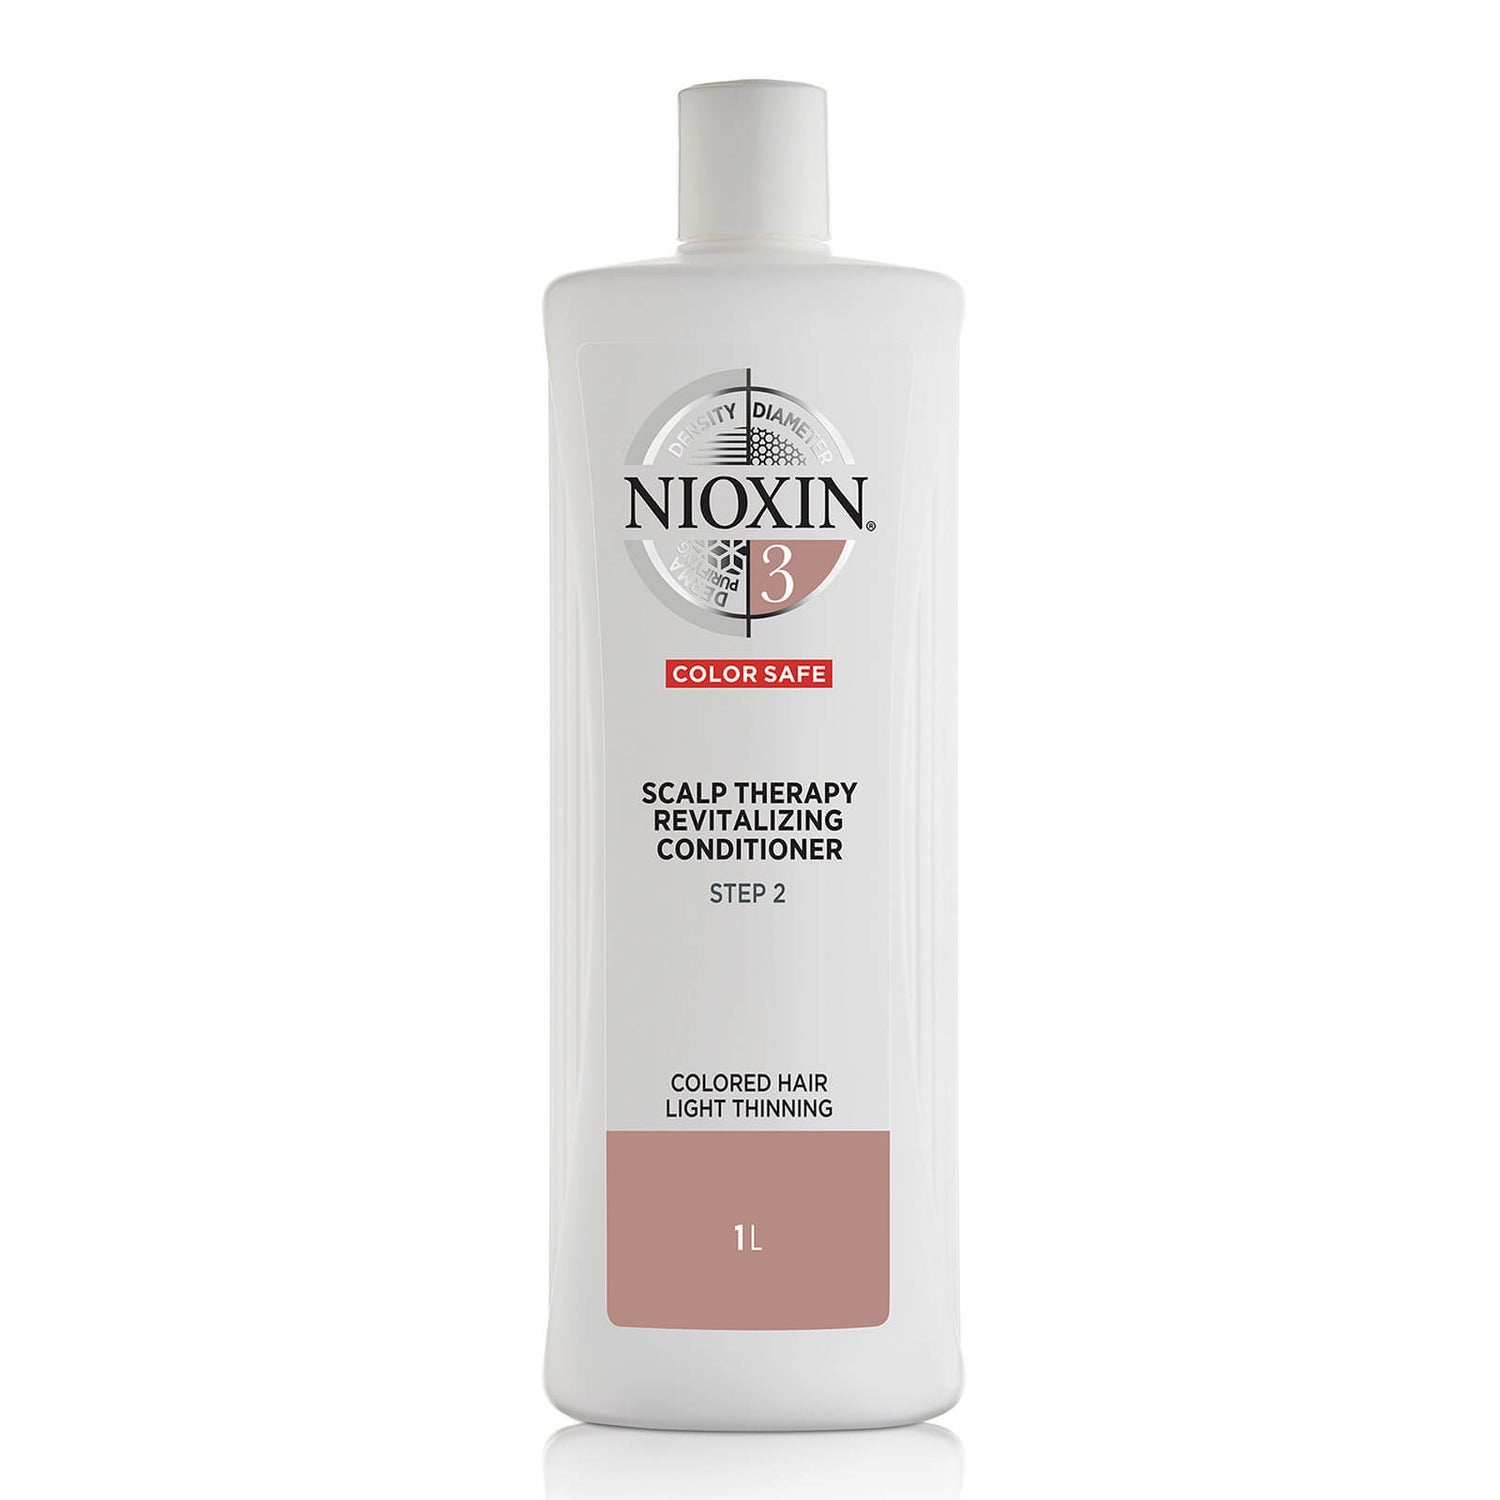 NIOXIN 3-Part System 3 Scalp Therapy Revitalising Conditioner for Coloured Hair with Light Thinning -hoitoaine, 1 000 ml